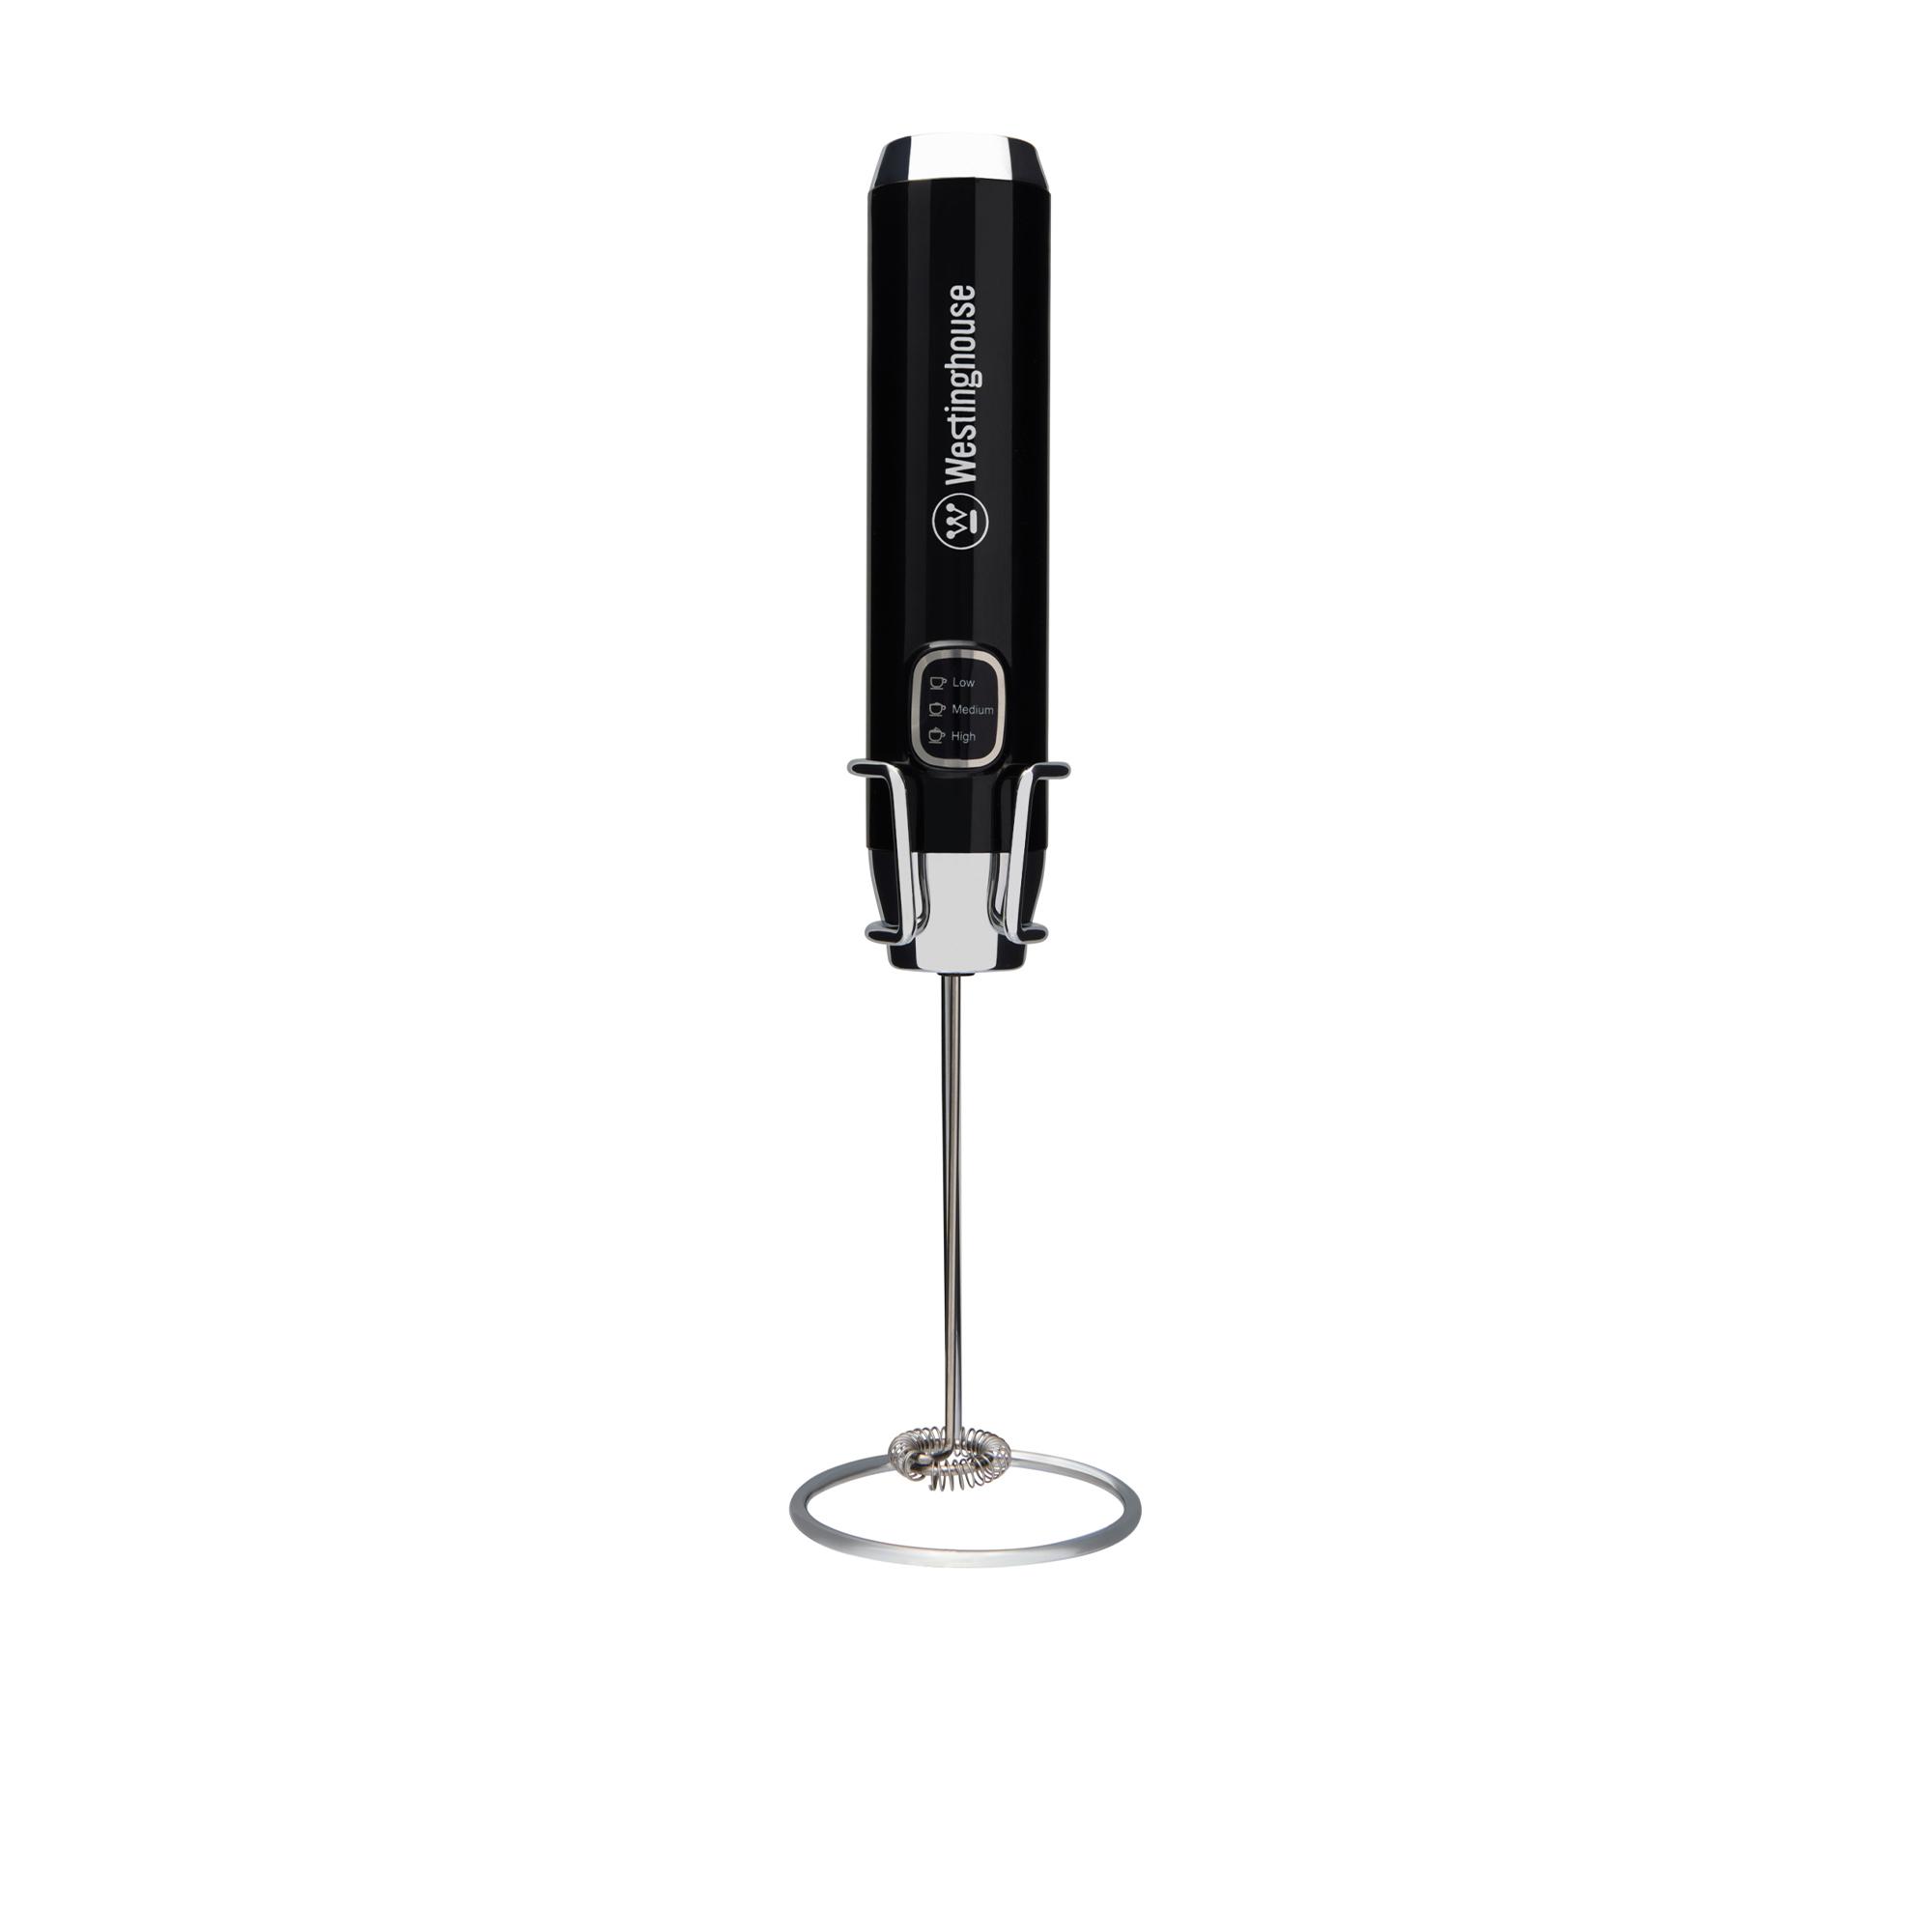 Westinghouse Cordless Milk Frother Black Image 5